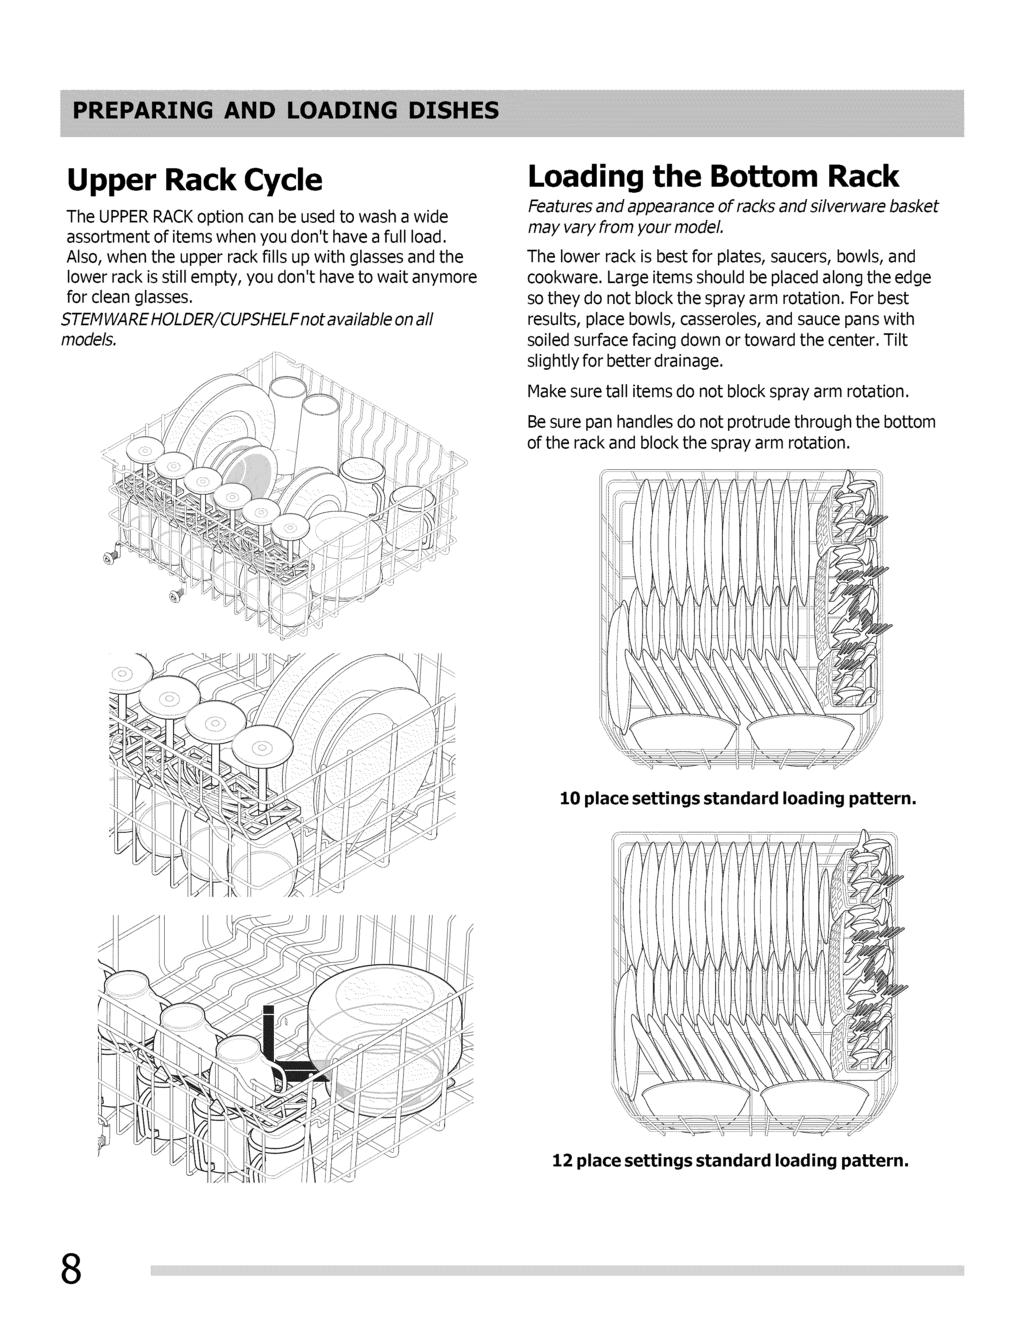 Upper Rack Cycle The UPPERRACK option can be used to wash a wide assortment of items when you don't have a full load.